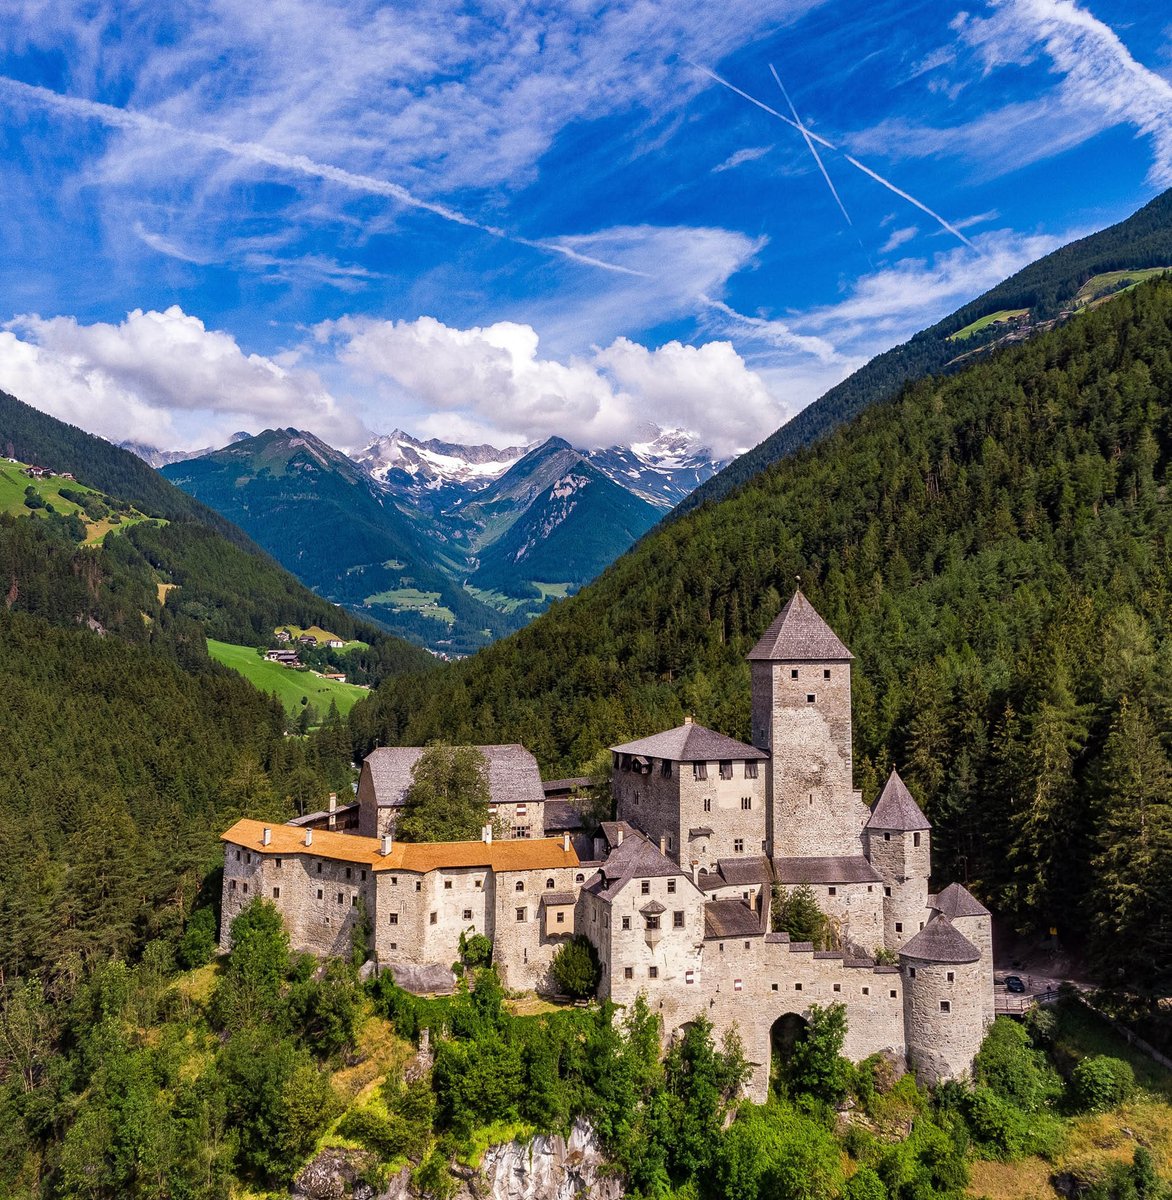 The castle of Tures (Bz), Italy